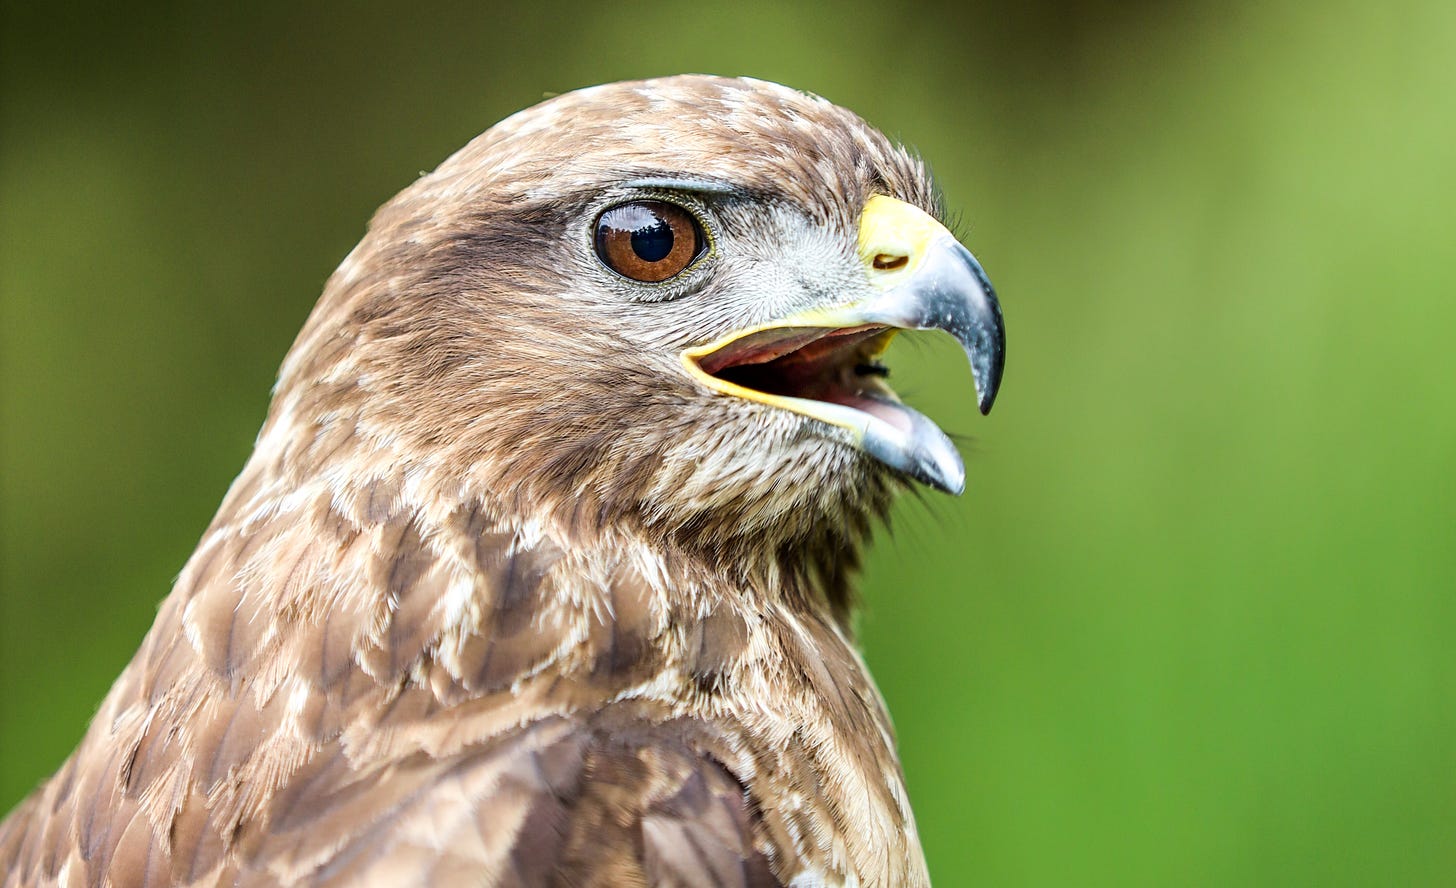 A female red-tailed hawk, brown and white feathers, brown eyes, with beak open as if surprised